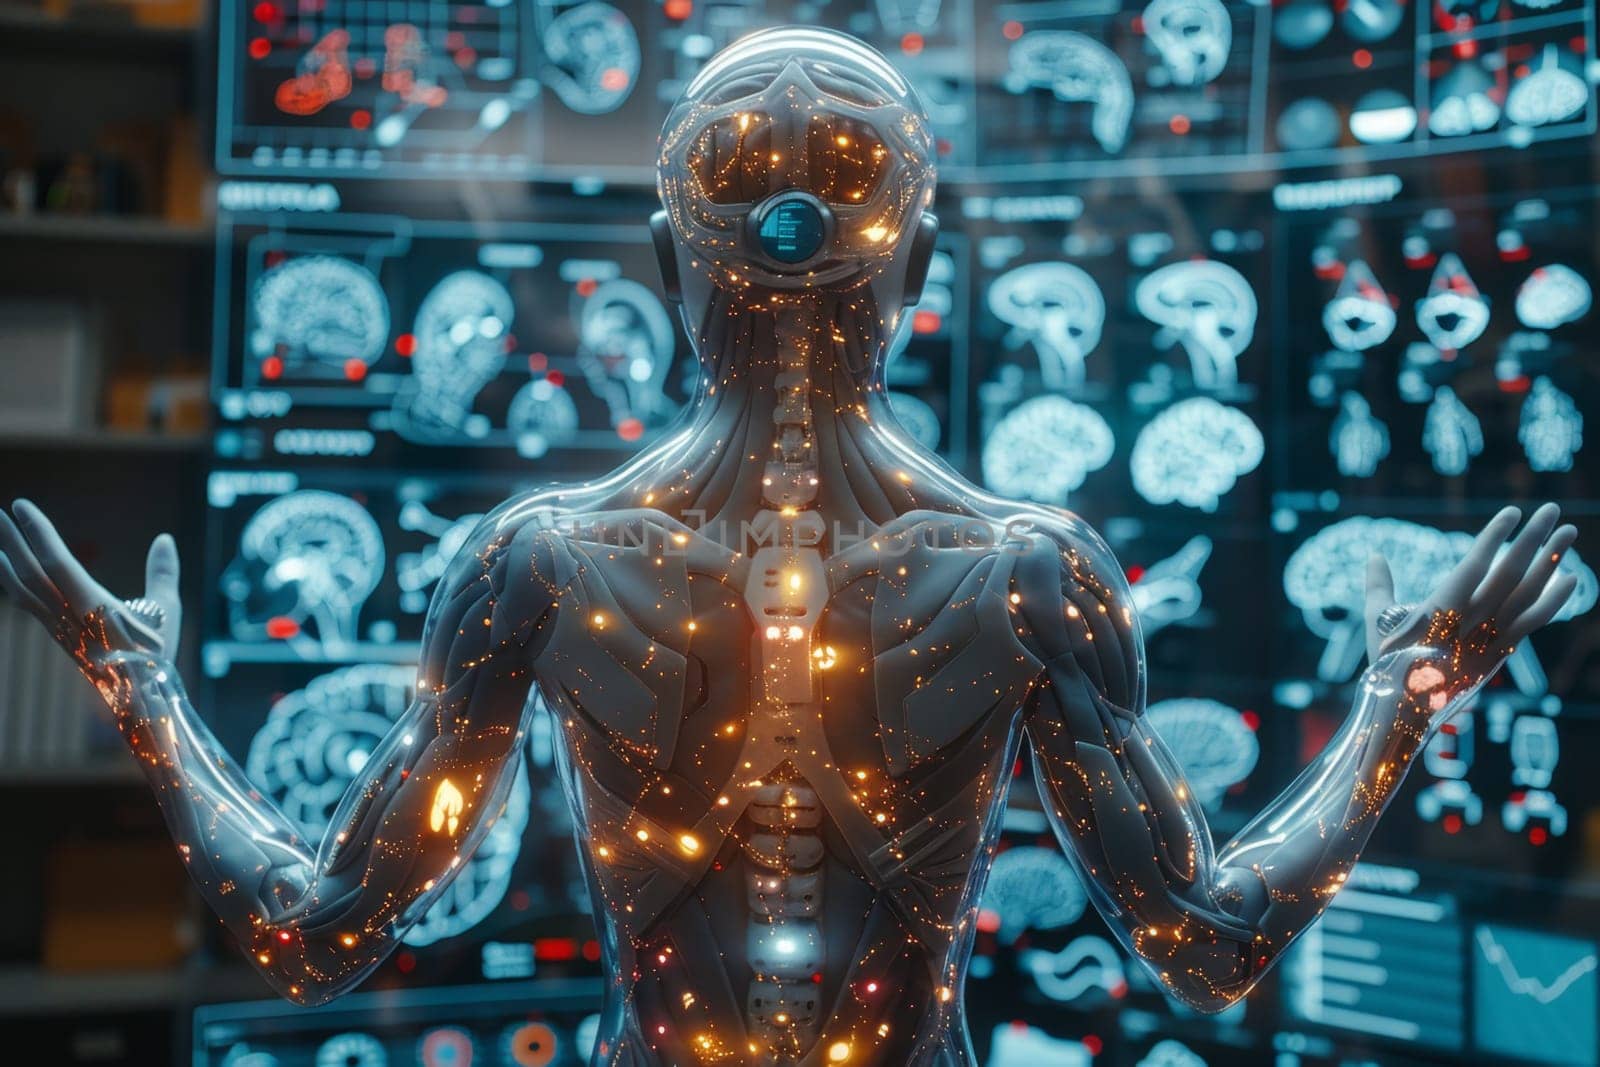 The skeletal structure of the Human body stands in front of a digital display, examining the contents on the screen by Lobachad